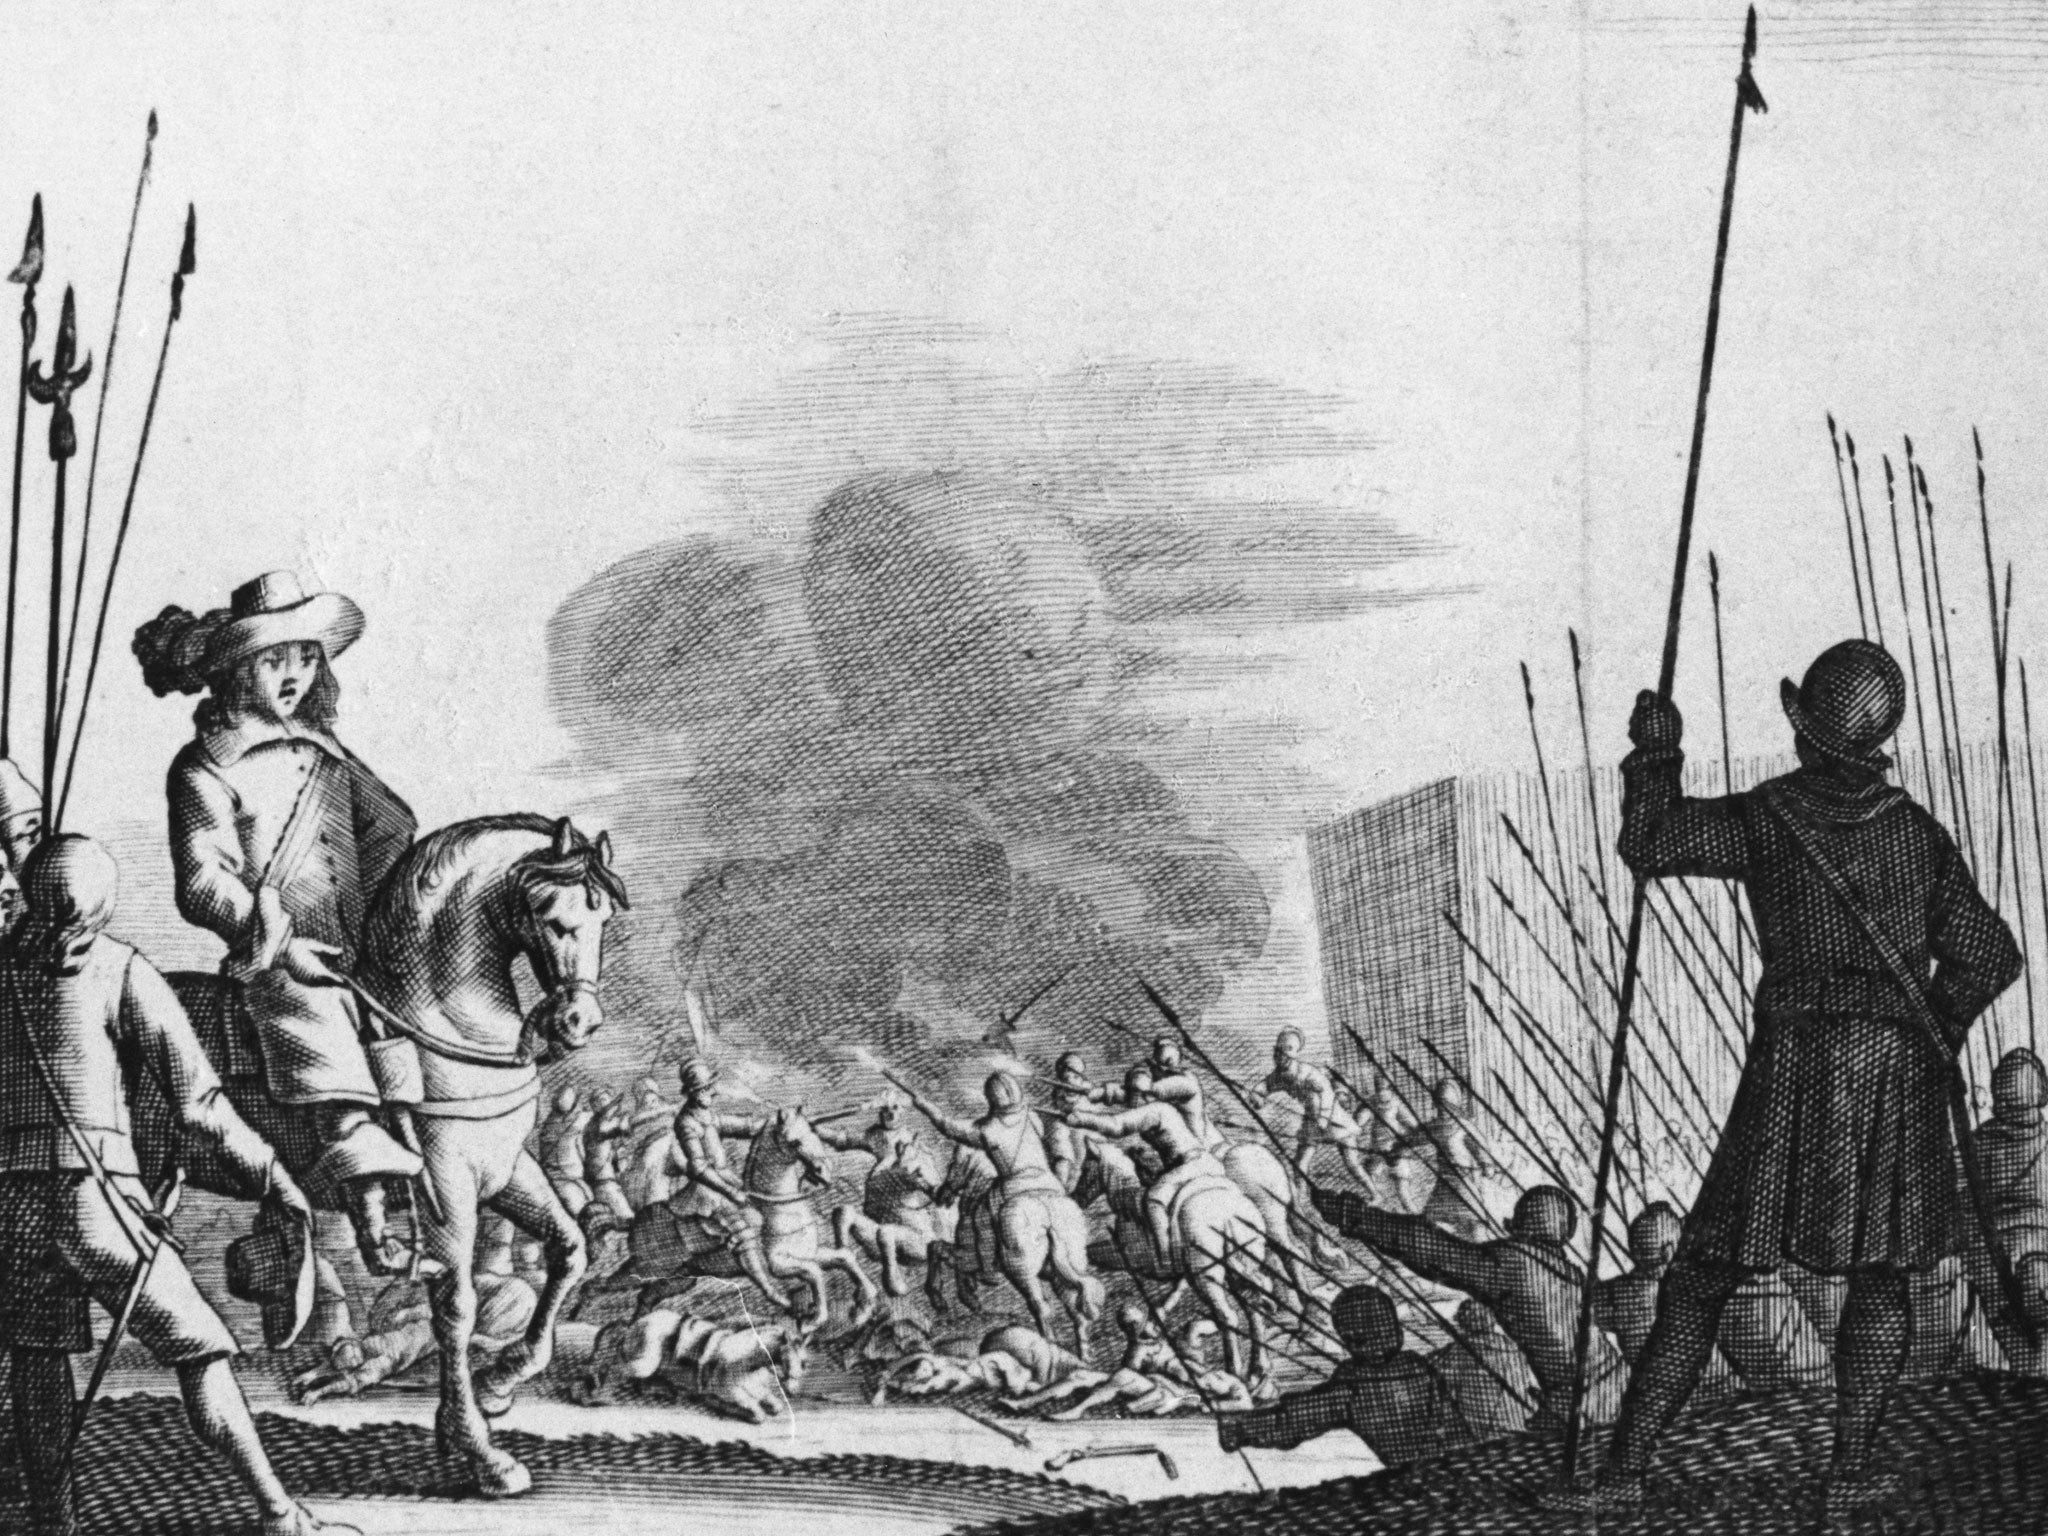 Oliver Cromwell during the third English civil war. A study has found that a warmer world will cause more inter-group conflict and civil wars